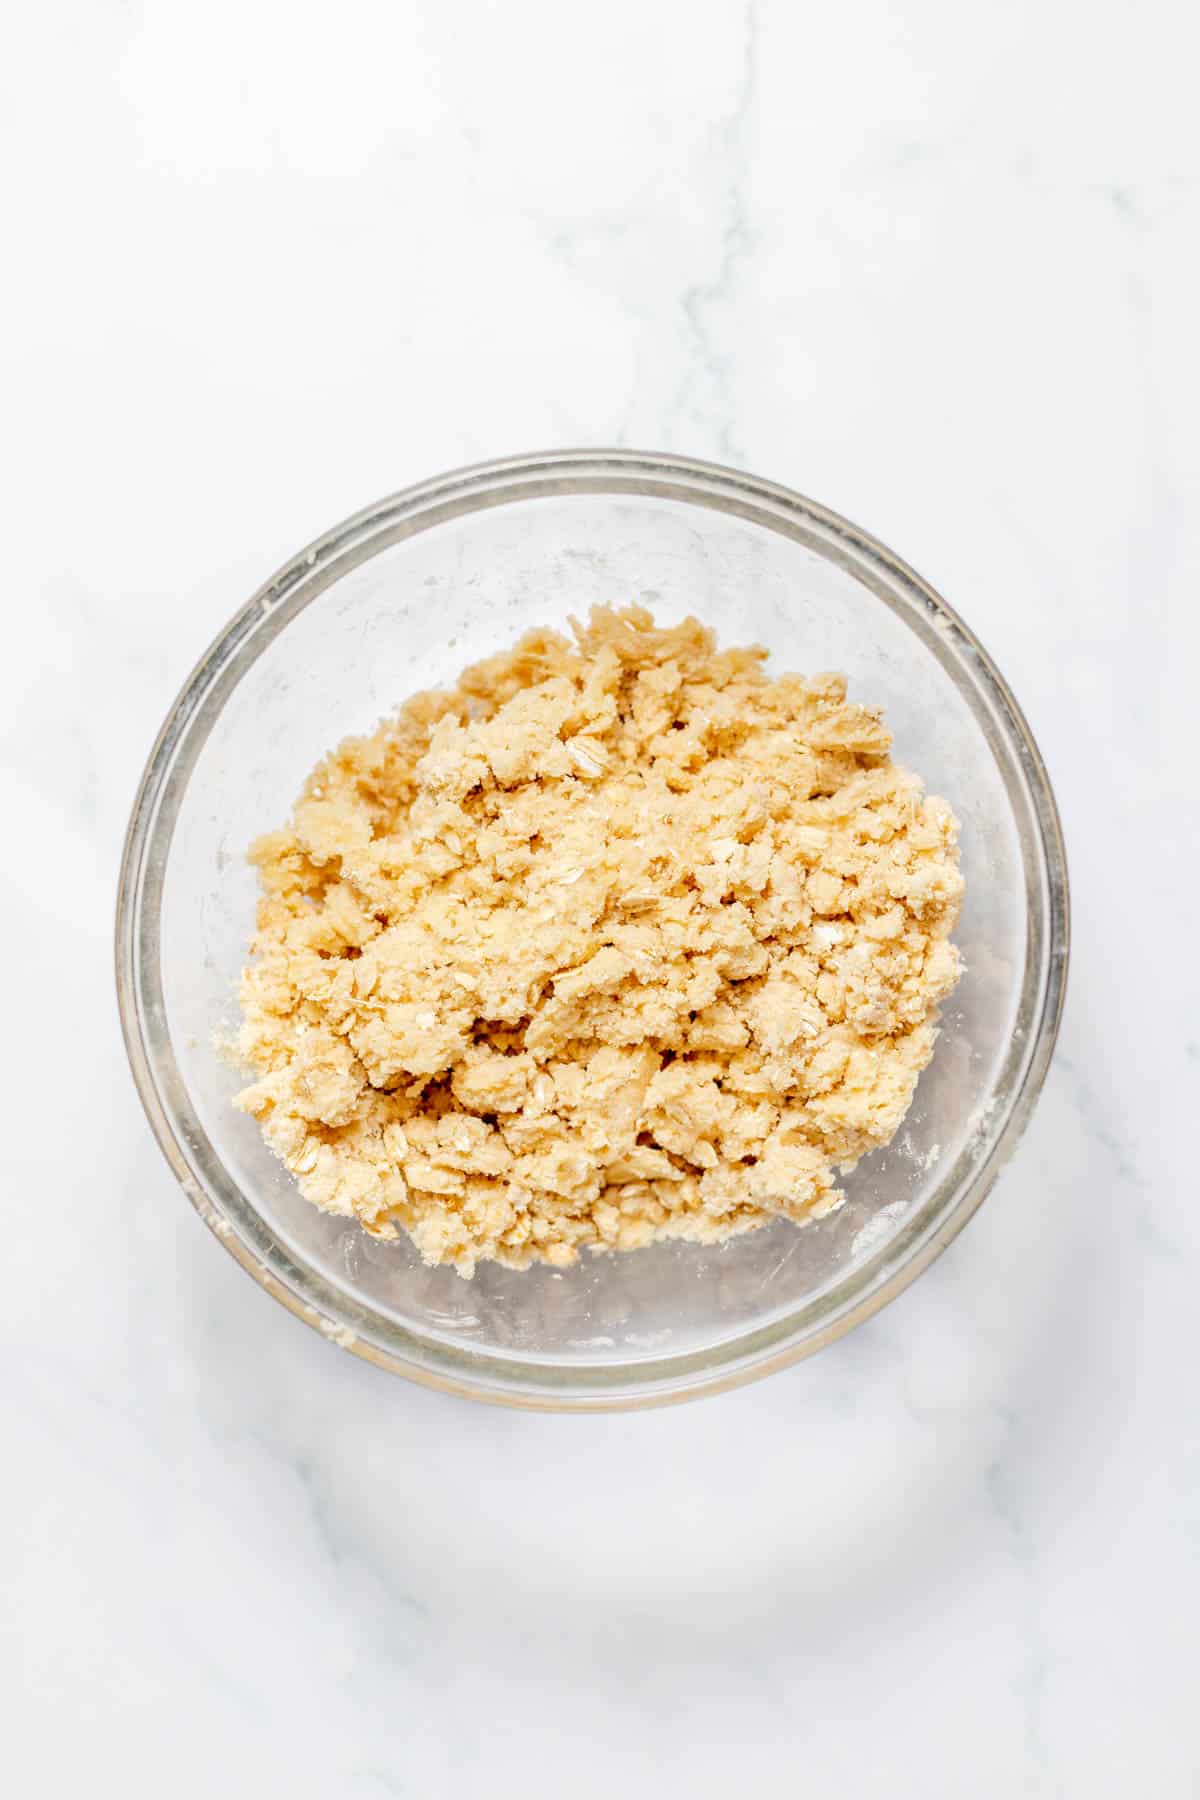 A streusel crumble mixture in a glass mixing bowl.